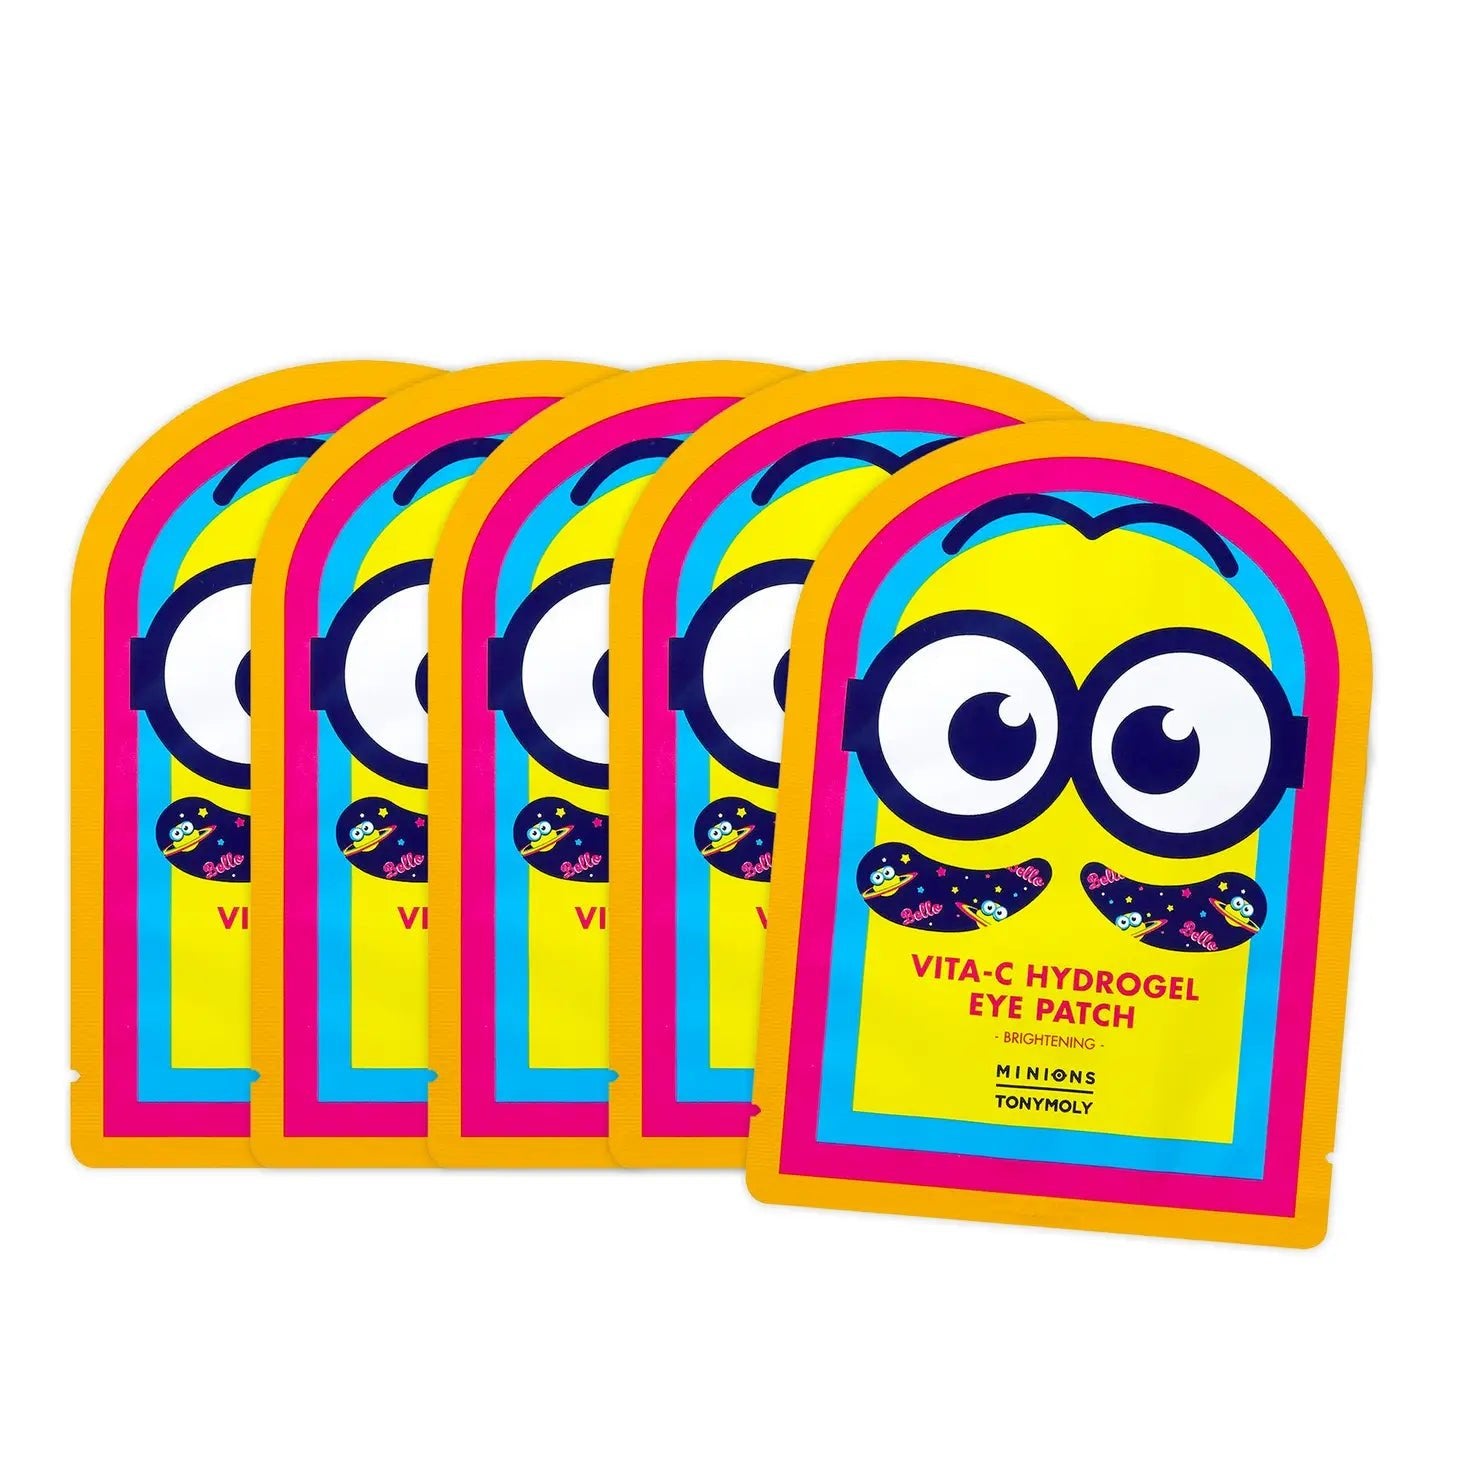 Shop Tony Moly x Minions Vita-C Hydrogel Eye Patch - Premium Beauty Product from Tony Moly Online now at Spoiled Brat 